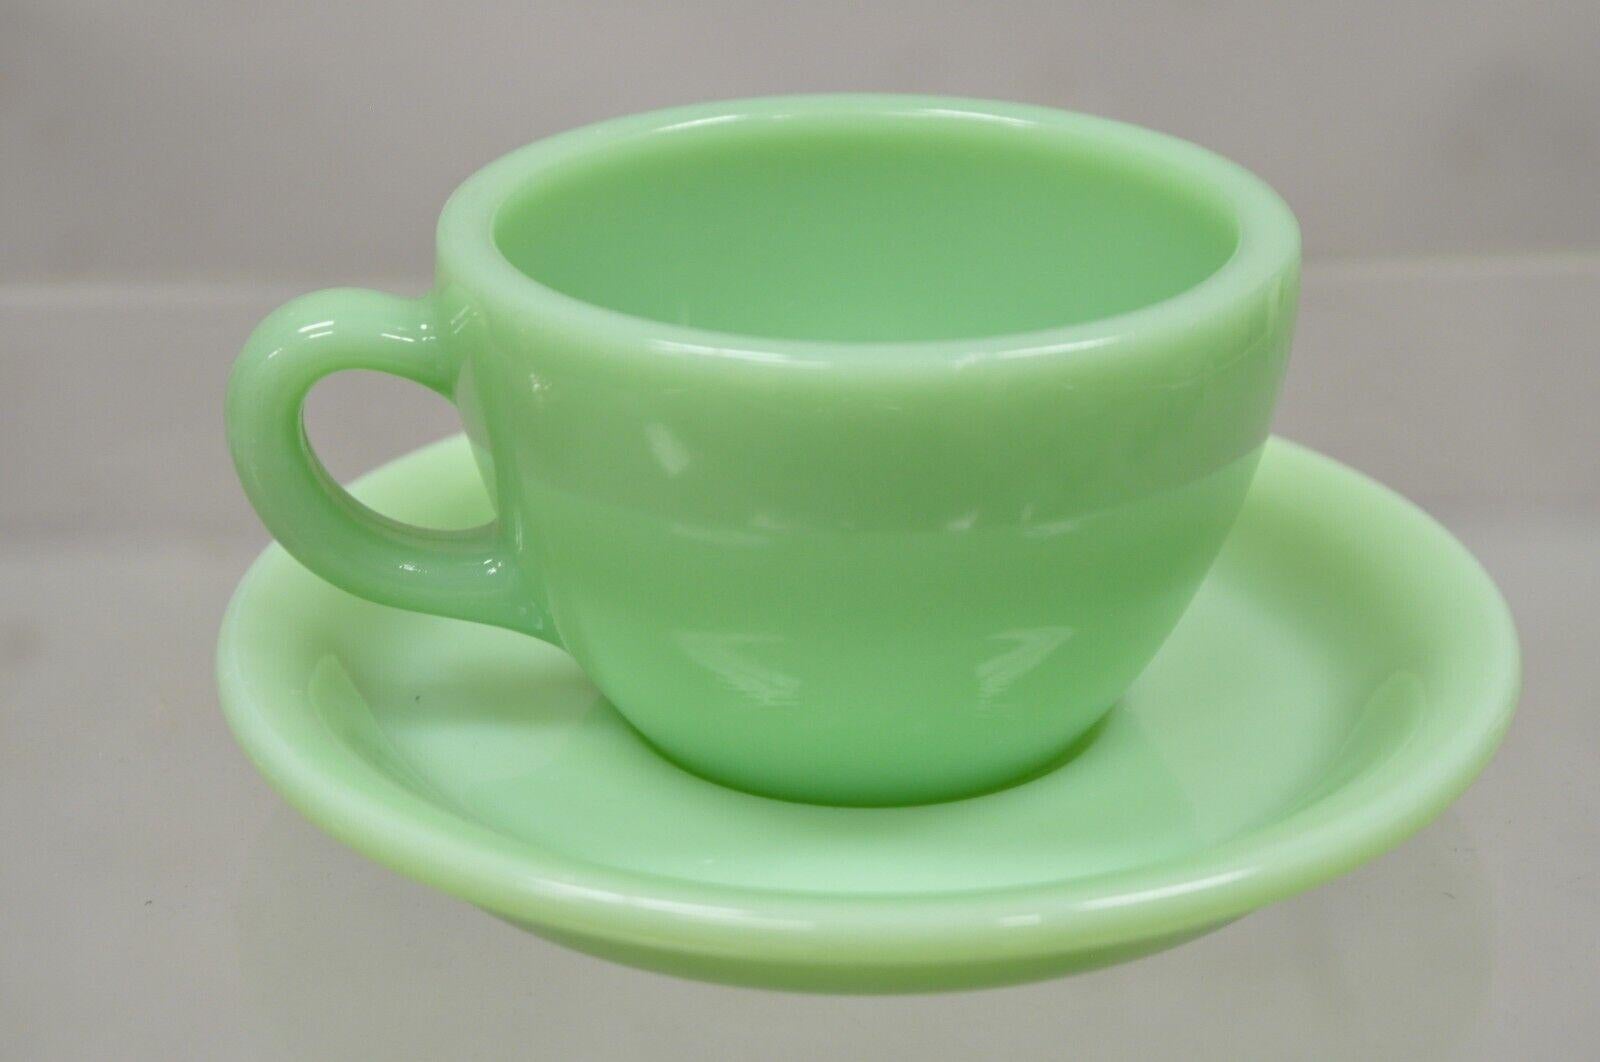 Vintage Fire King Jadeite Green Oven Ware Coffee Cup and Saucer - Set of 4 2